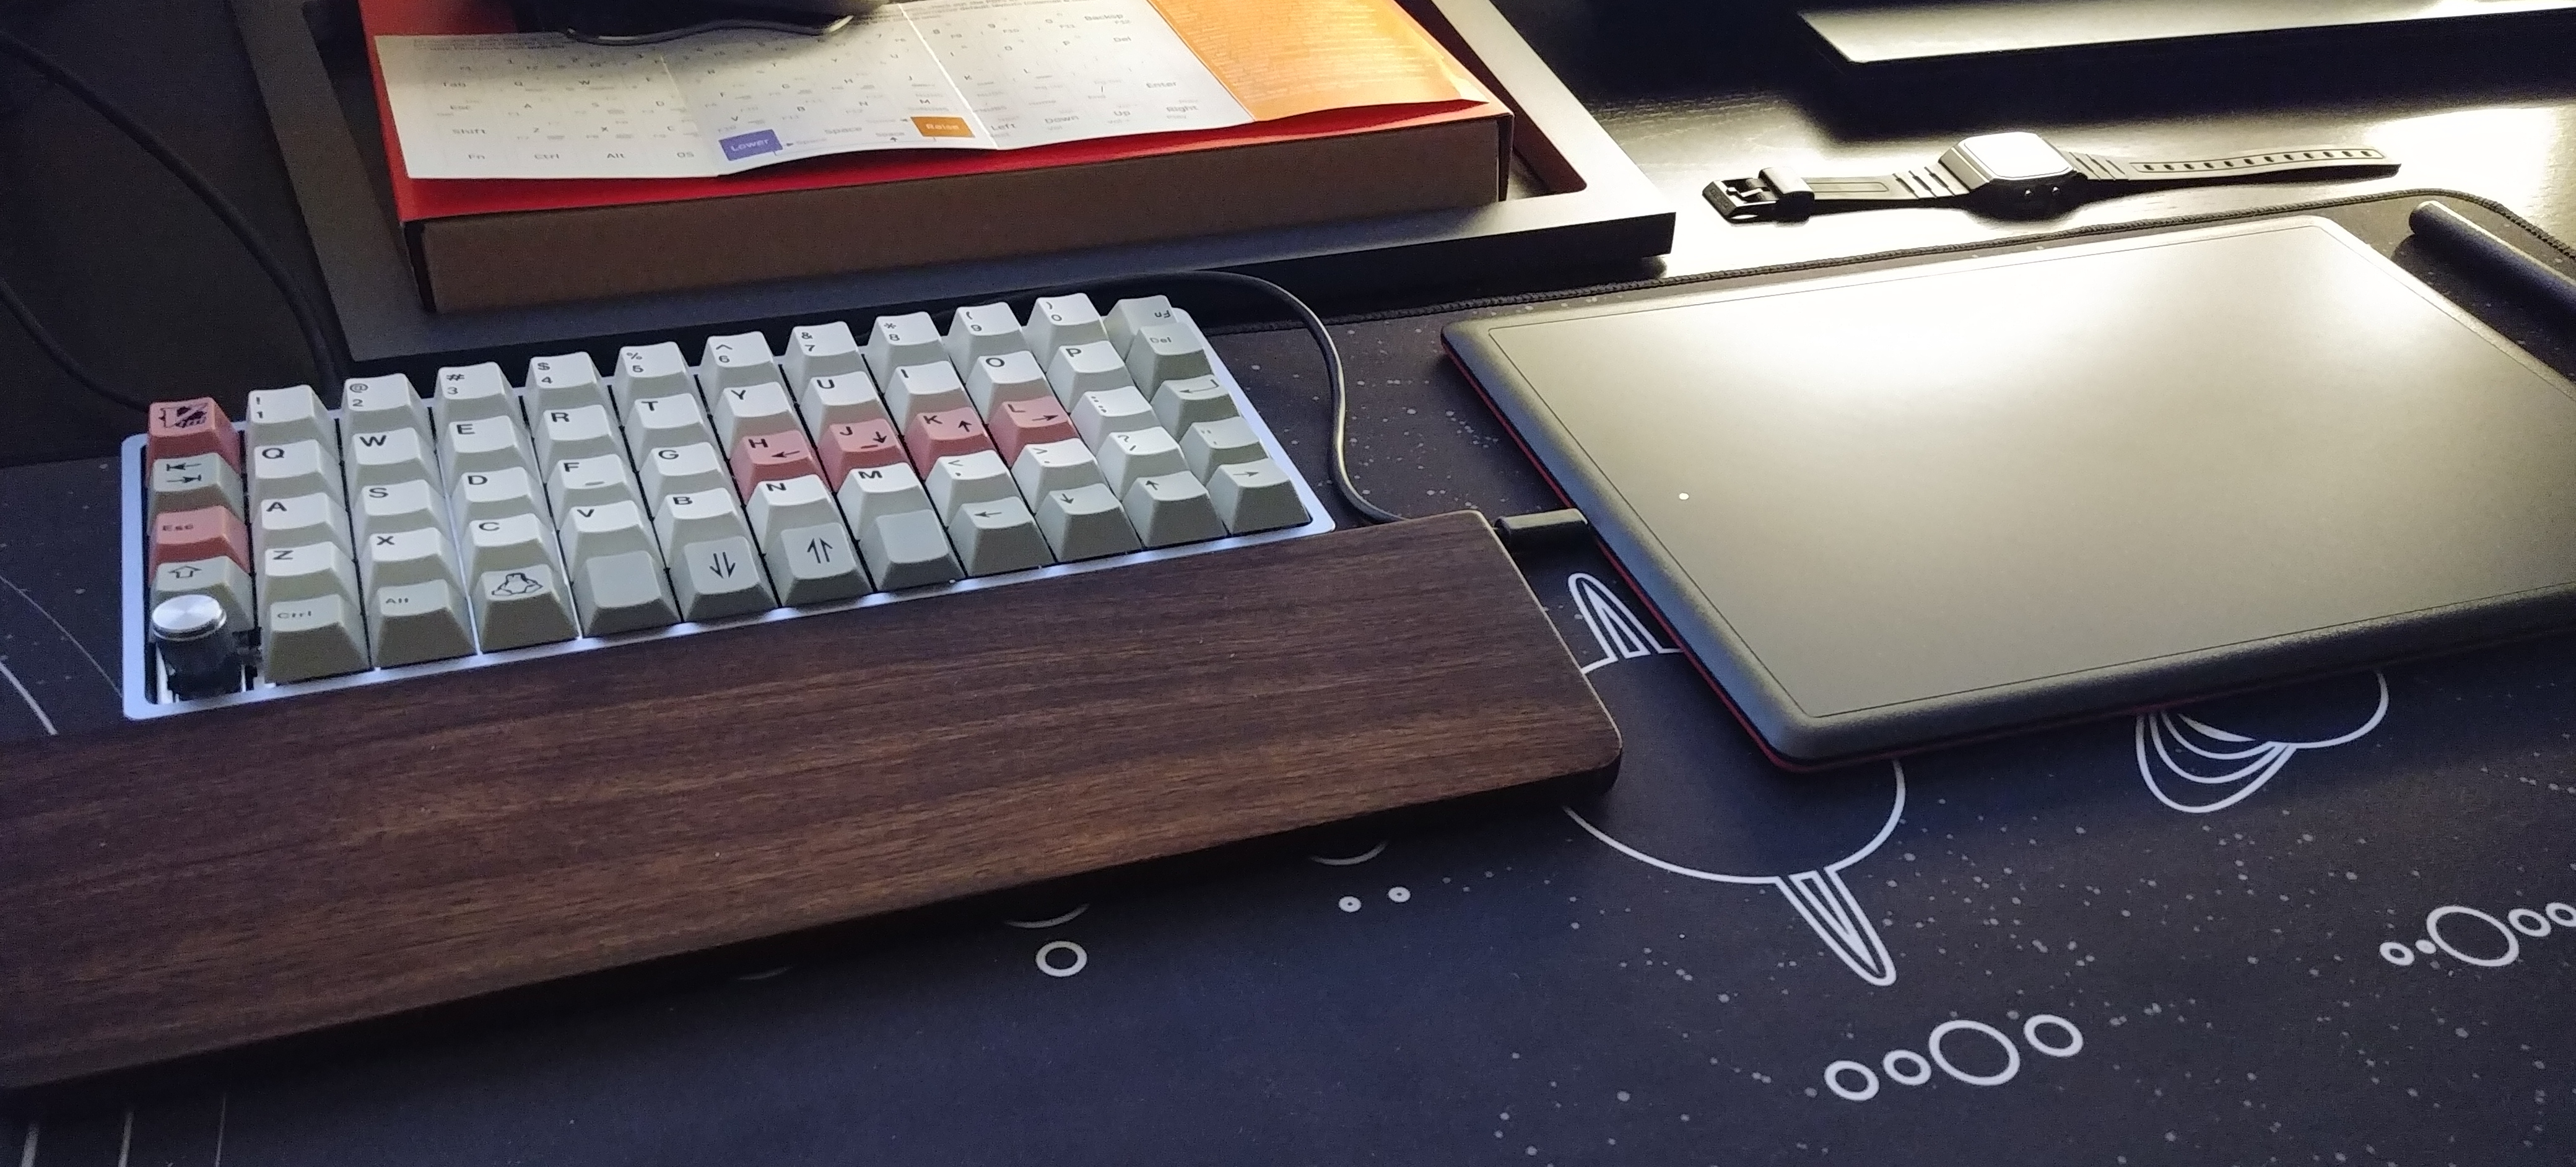 a small ortholinear keyboard on the left and a pen tablet on the right